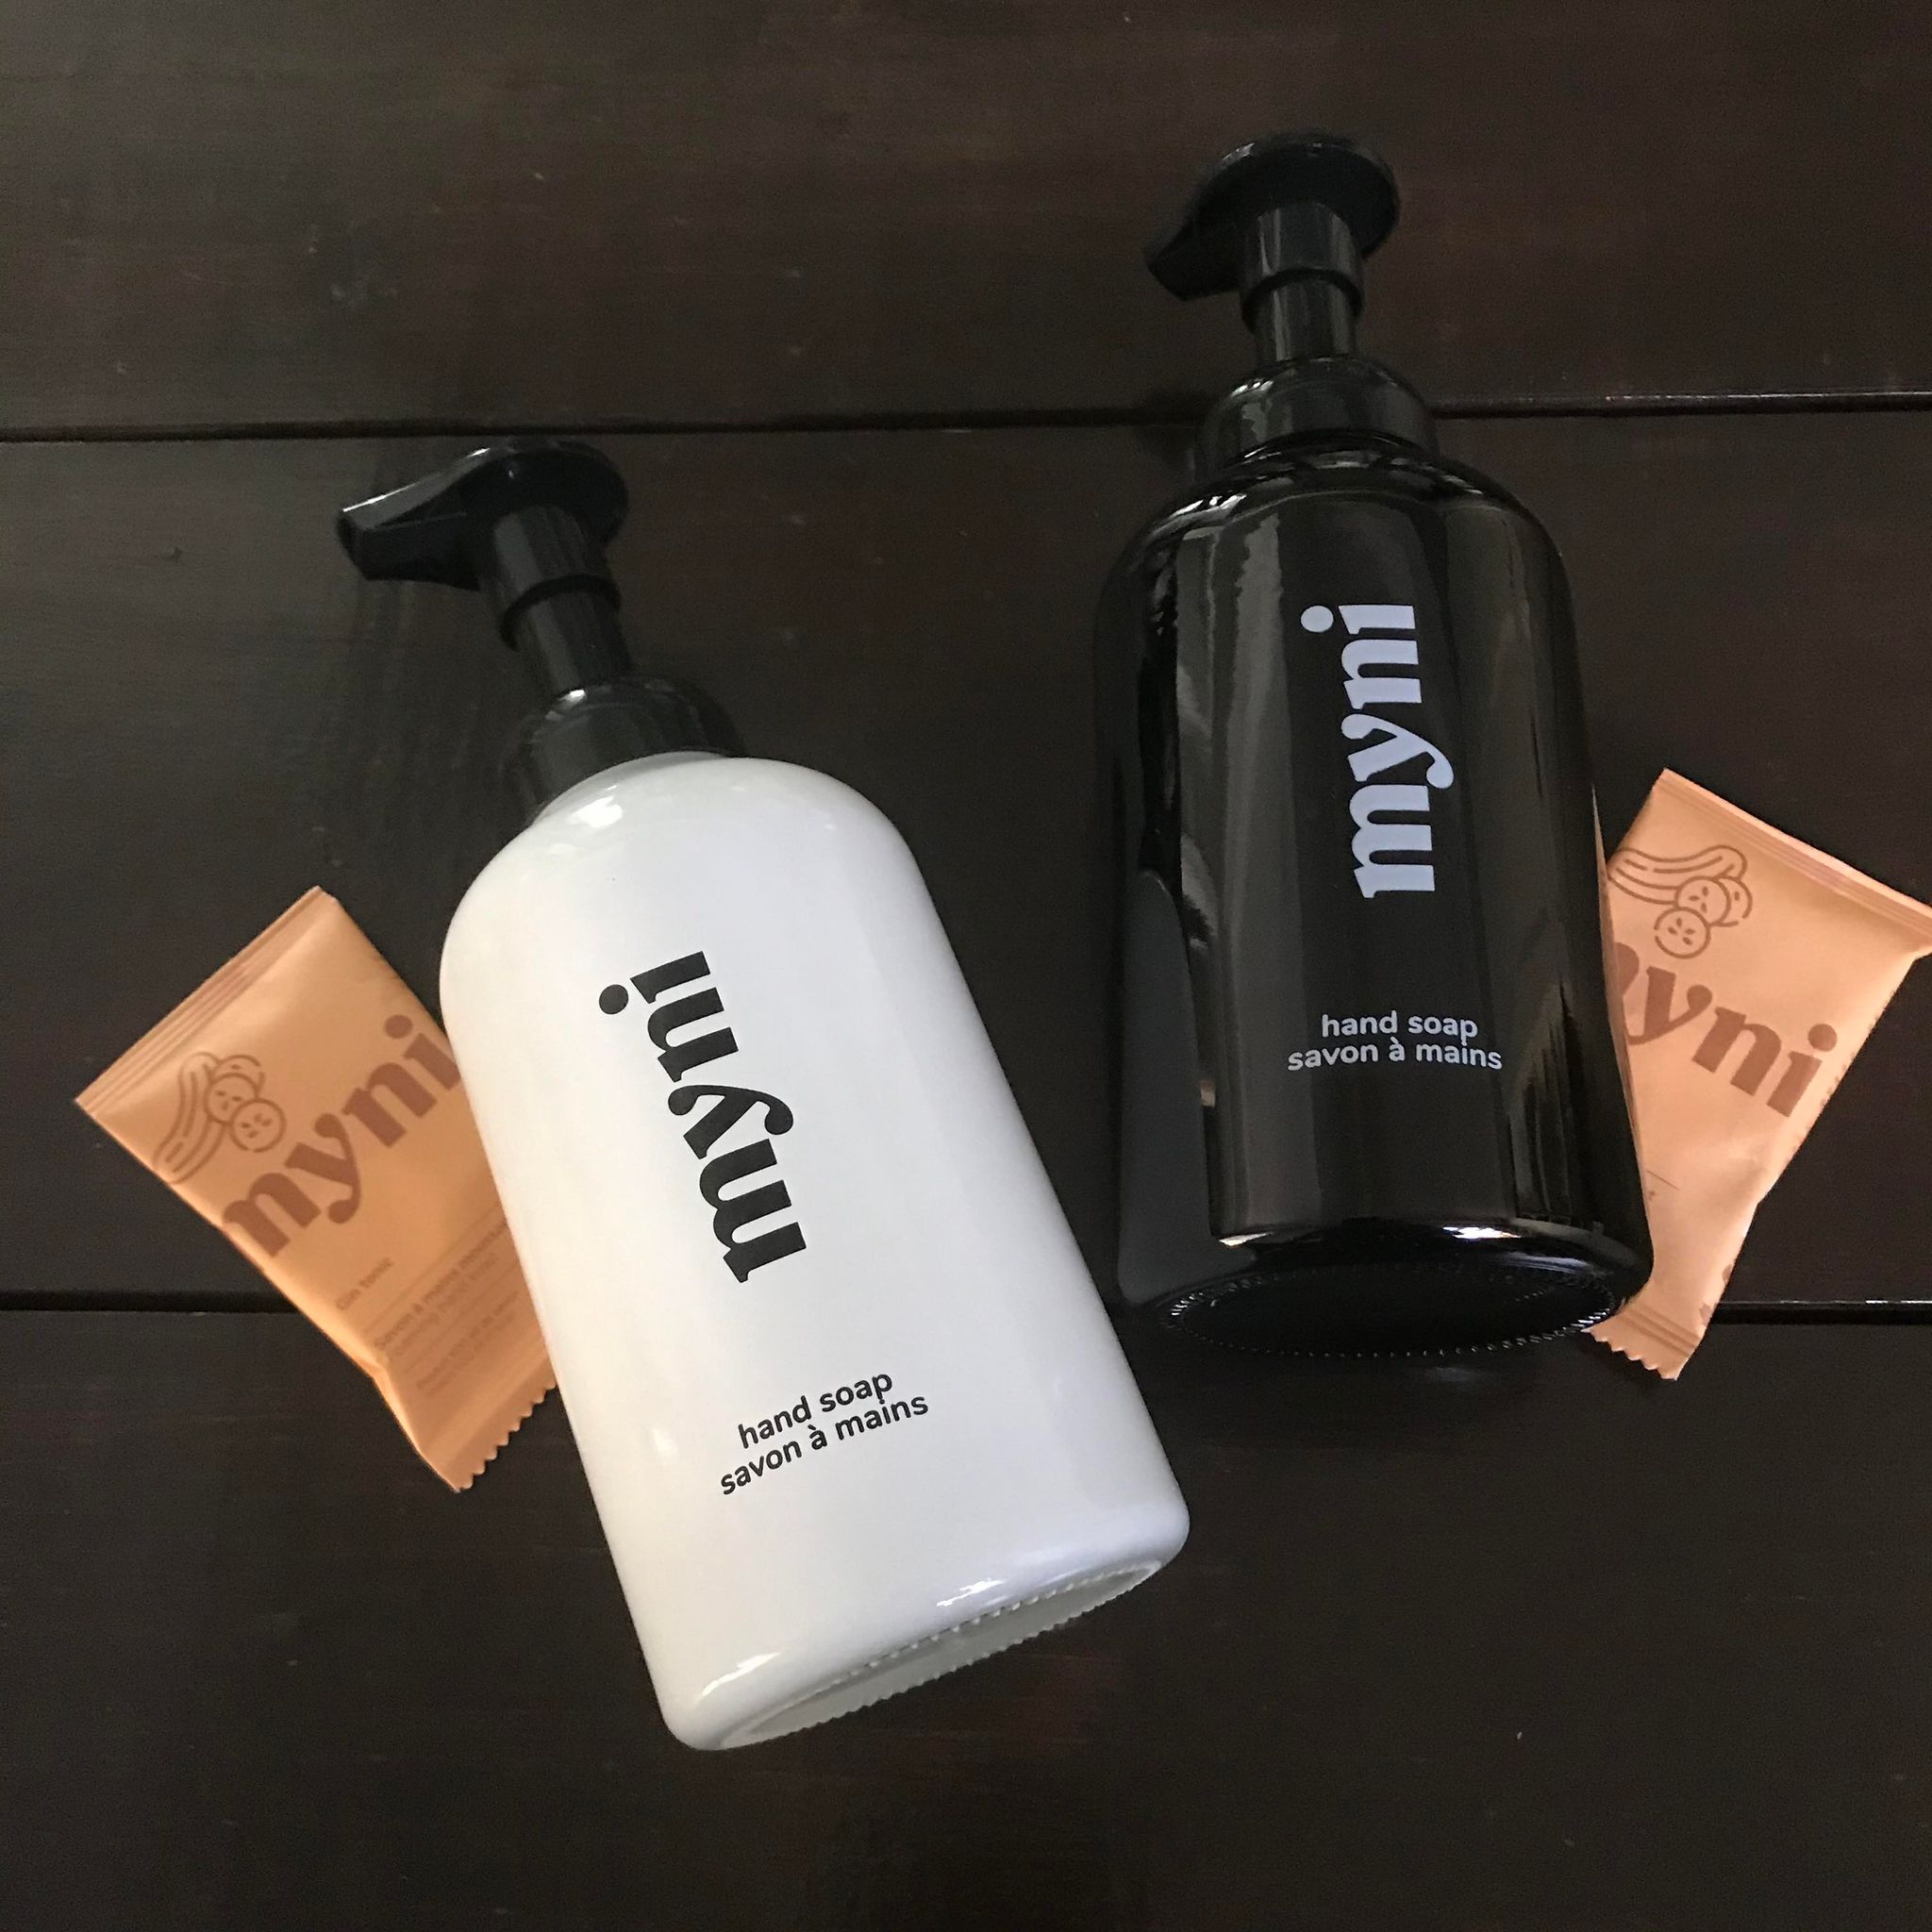 myni black lettering on white or white lettering on black refillable glass foaming hand soap bottles  come in a box with one hand soap tablet